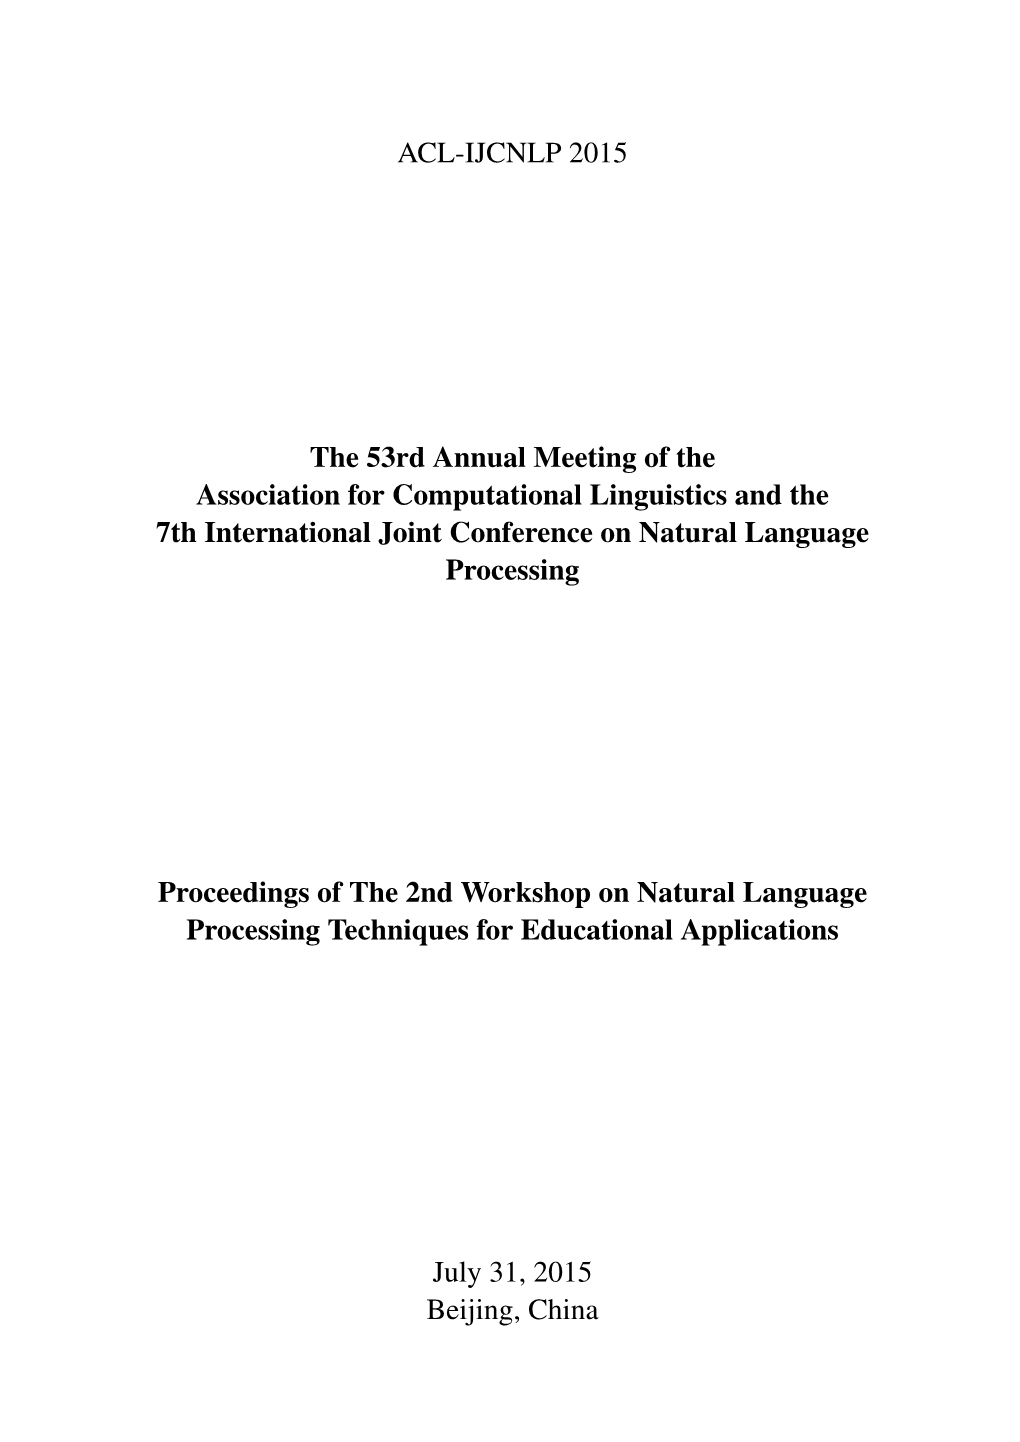 Proceedings of the 2Nd Workshop on Natural Language Processing Techniques for Educational Applications